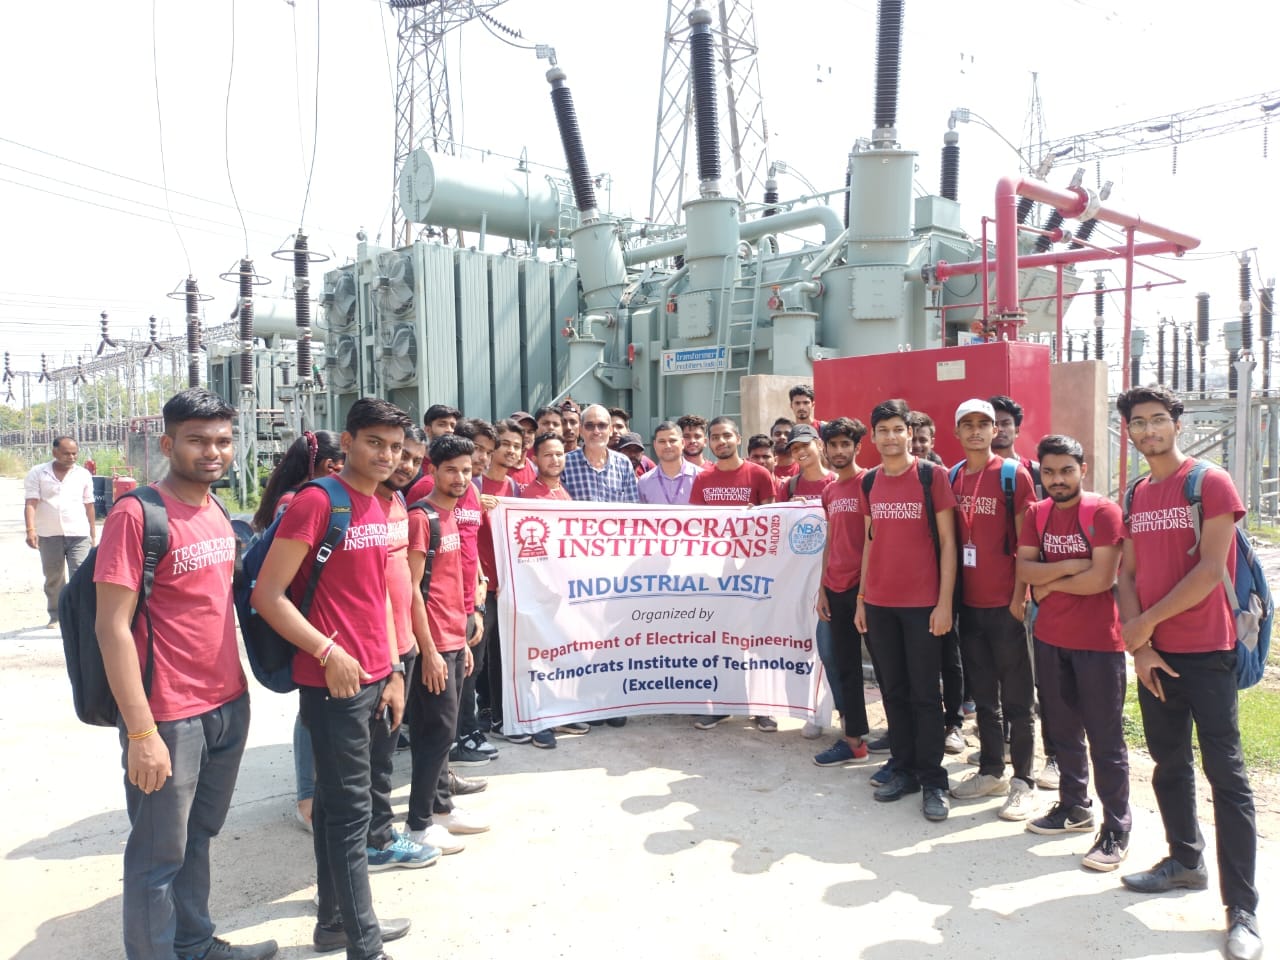 Industrial Visit by the Department of Electrical Engineering, Technocrats